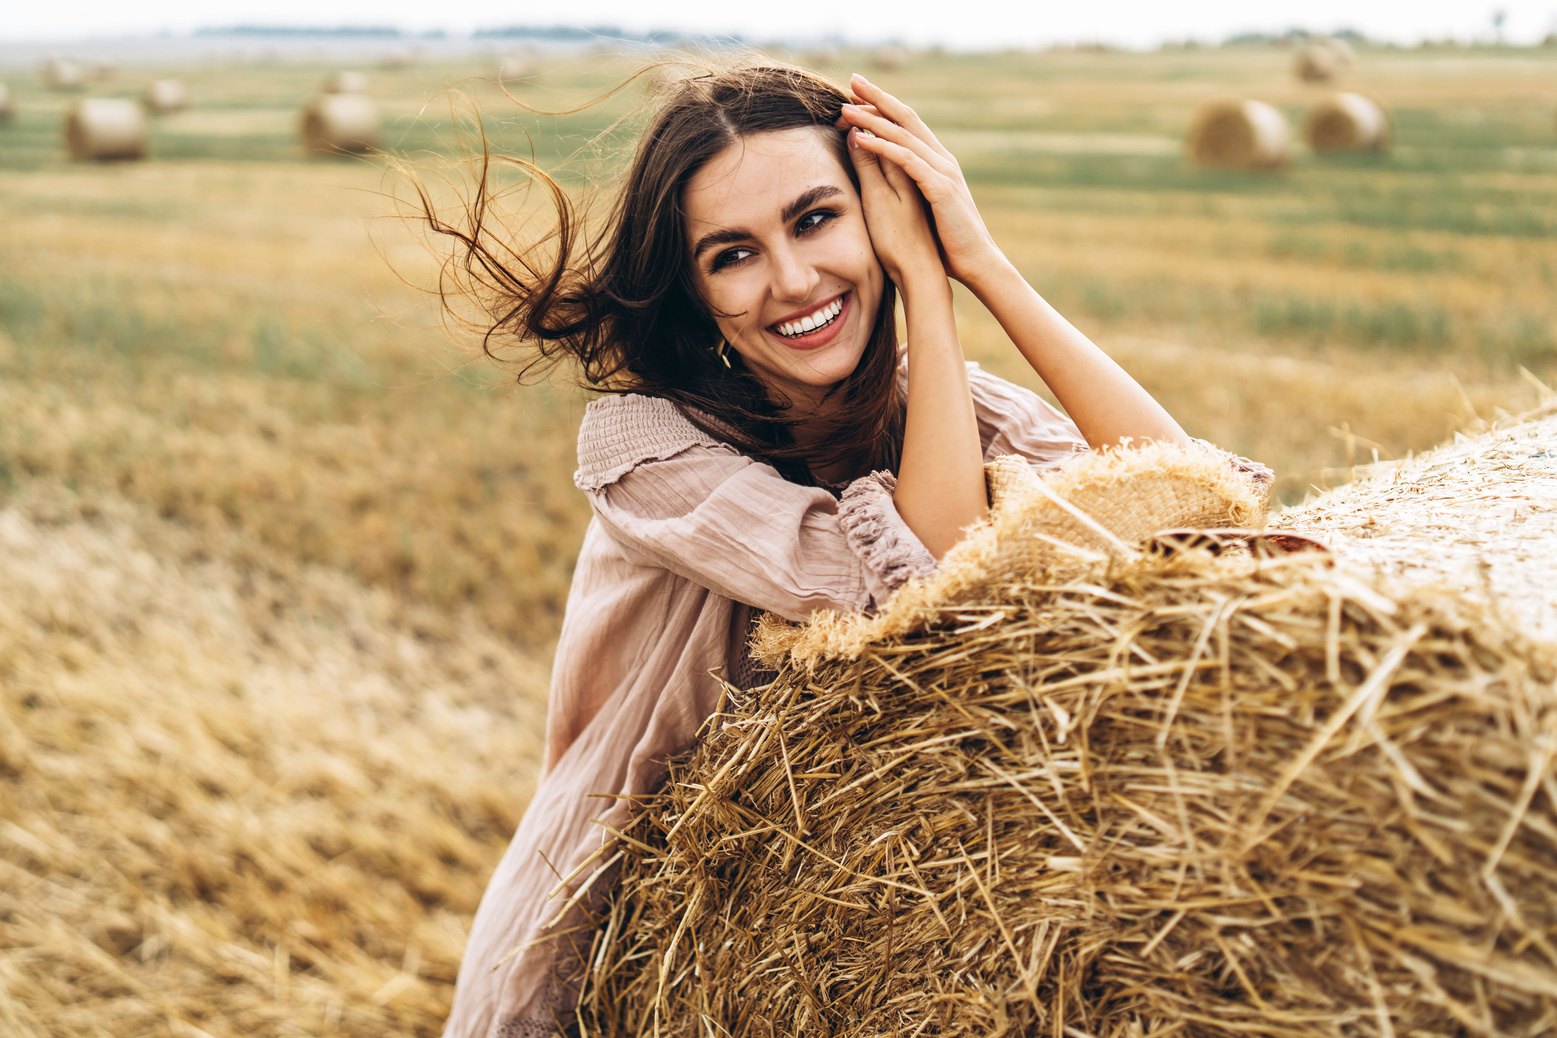 Portrait of Woman Standing by a Bale of Hay